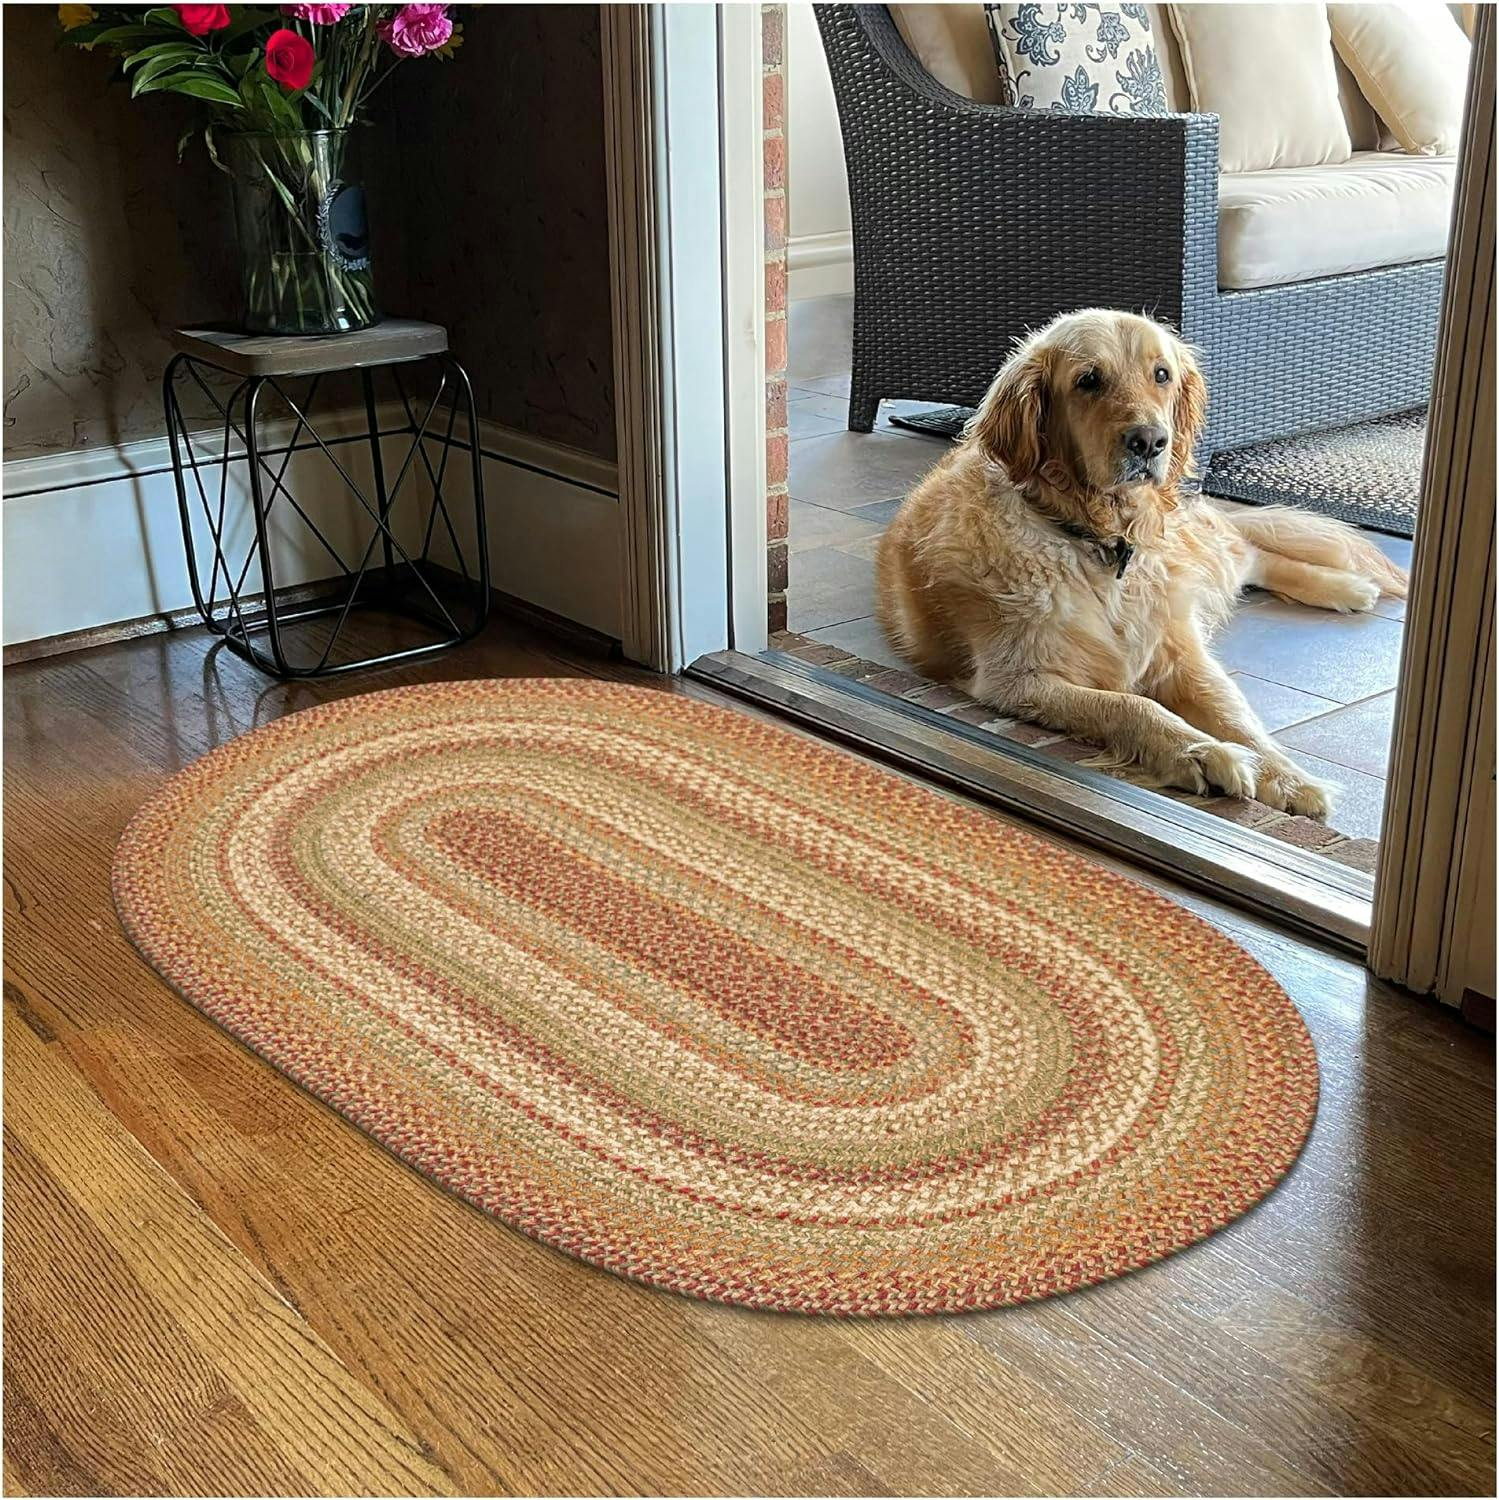 Harvest Oval Braided 20" x 30" Rug in Tan, Beige, and Gold Wool Blend